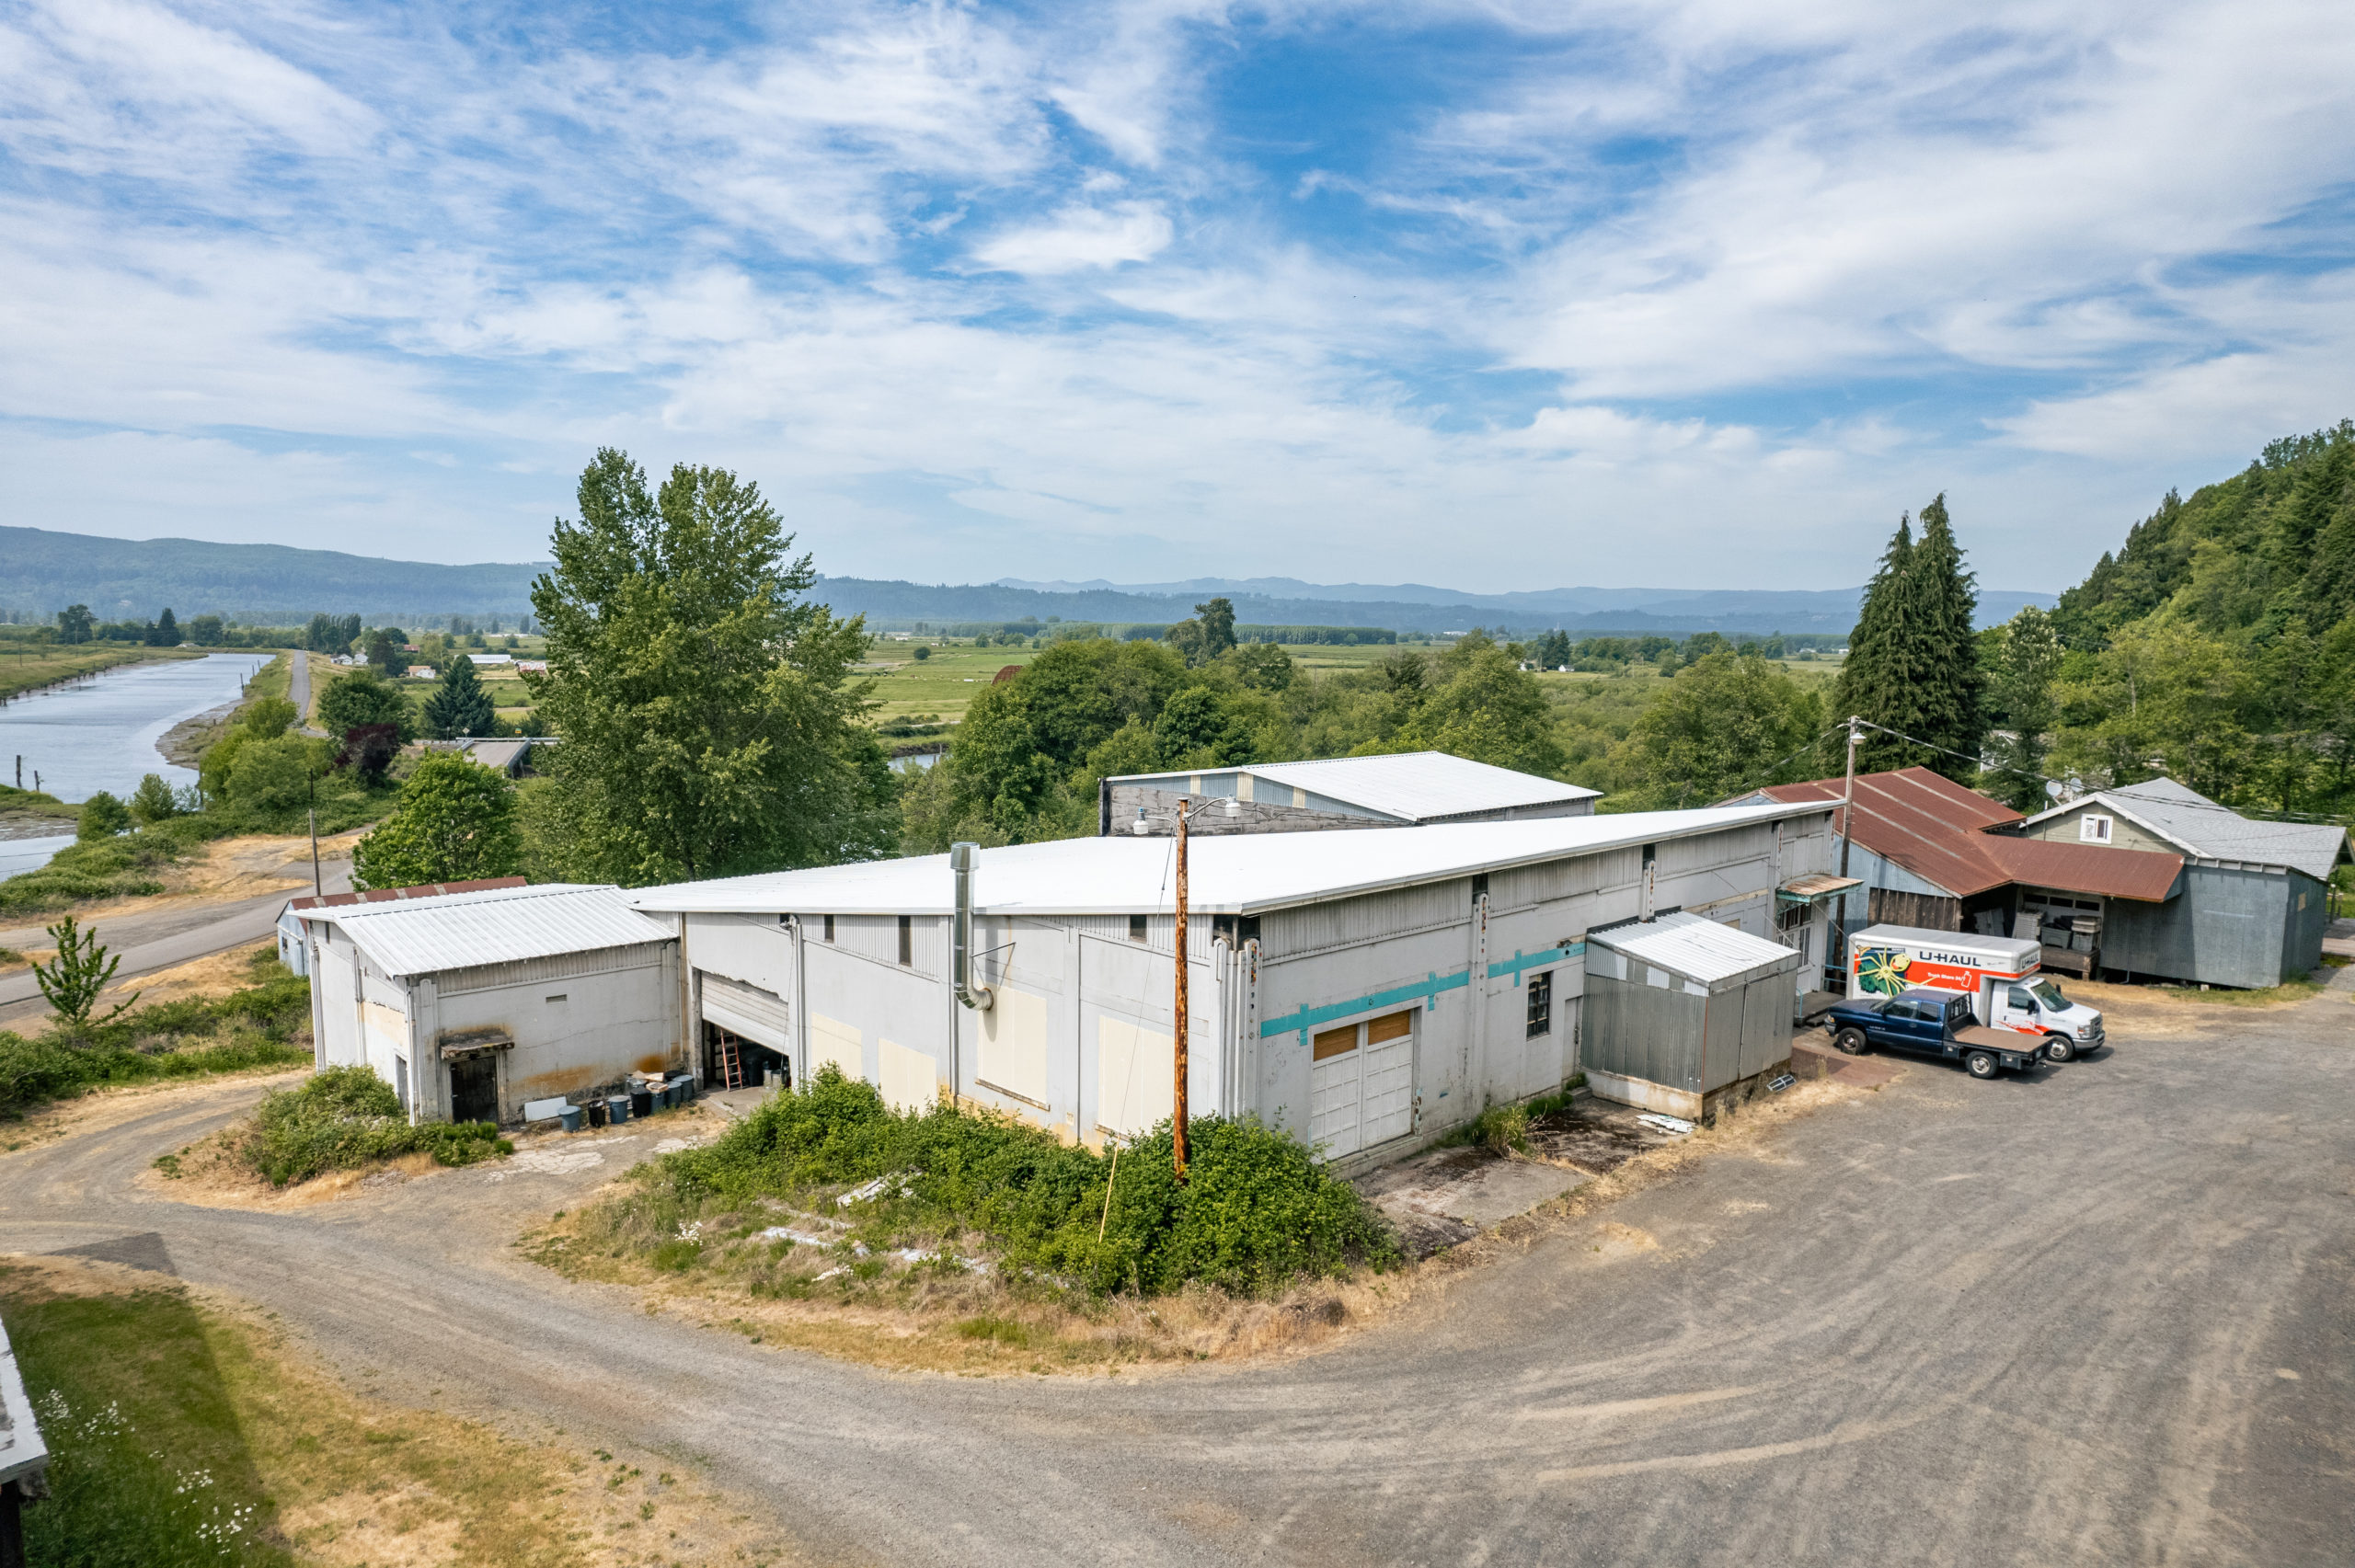 For Sale! Industrial Property in Clatskanie, OR – Auto Shop, Manufacturing, Cannabis Processing, Brewery